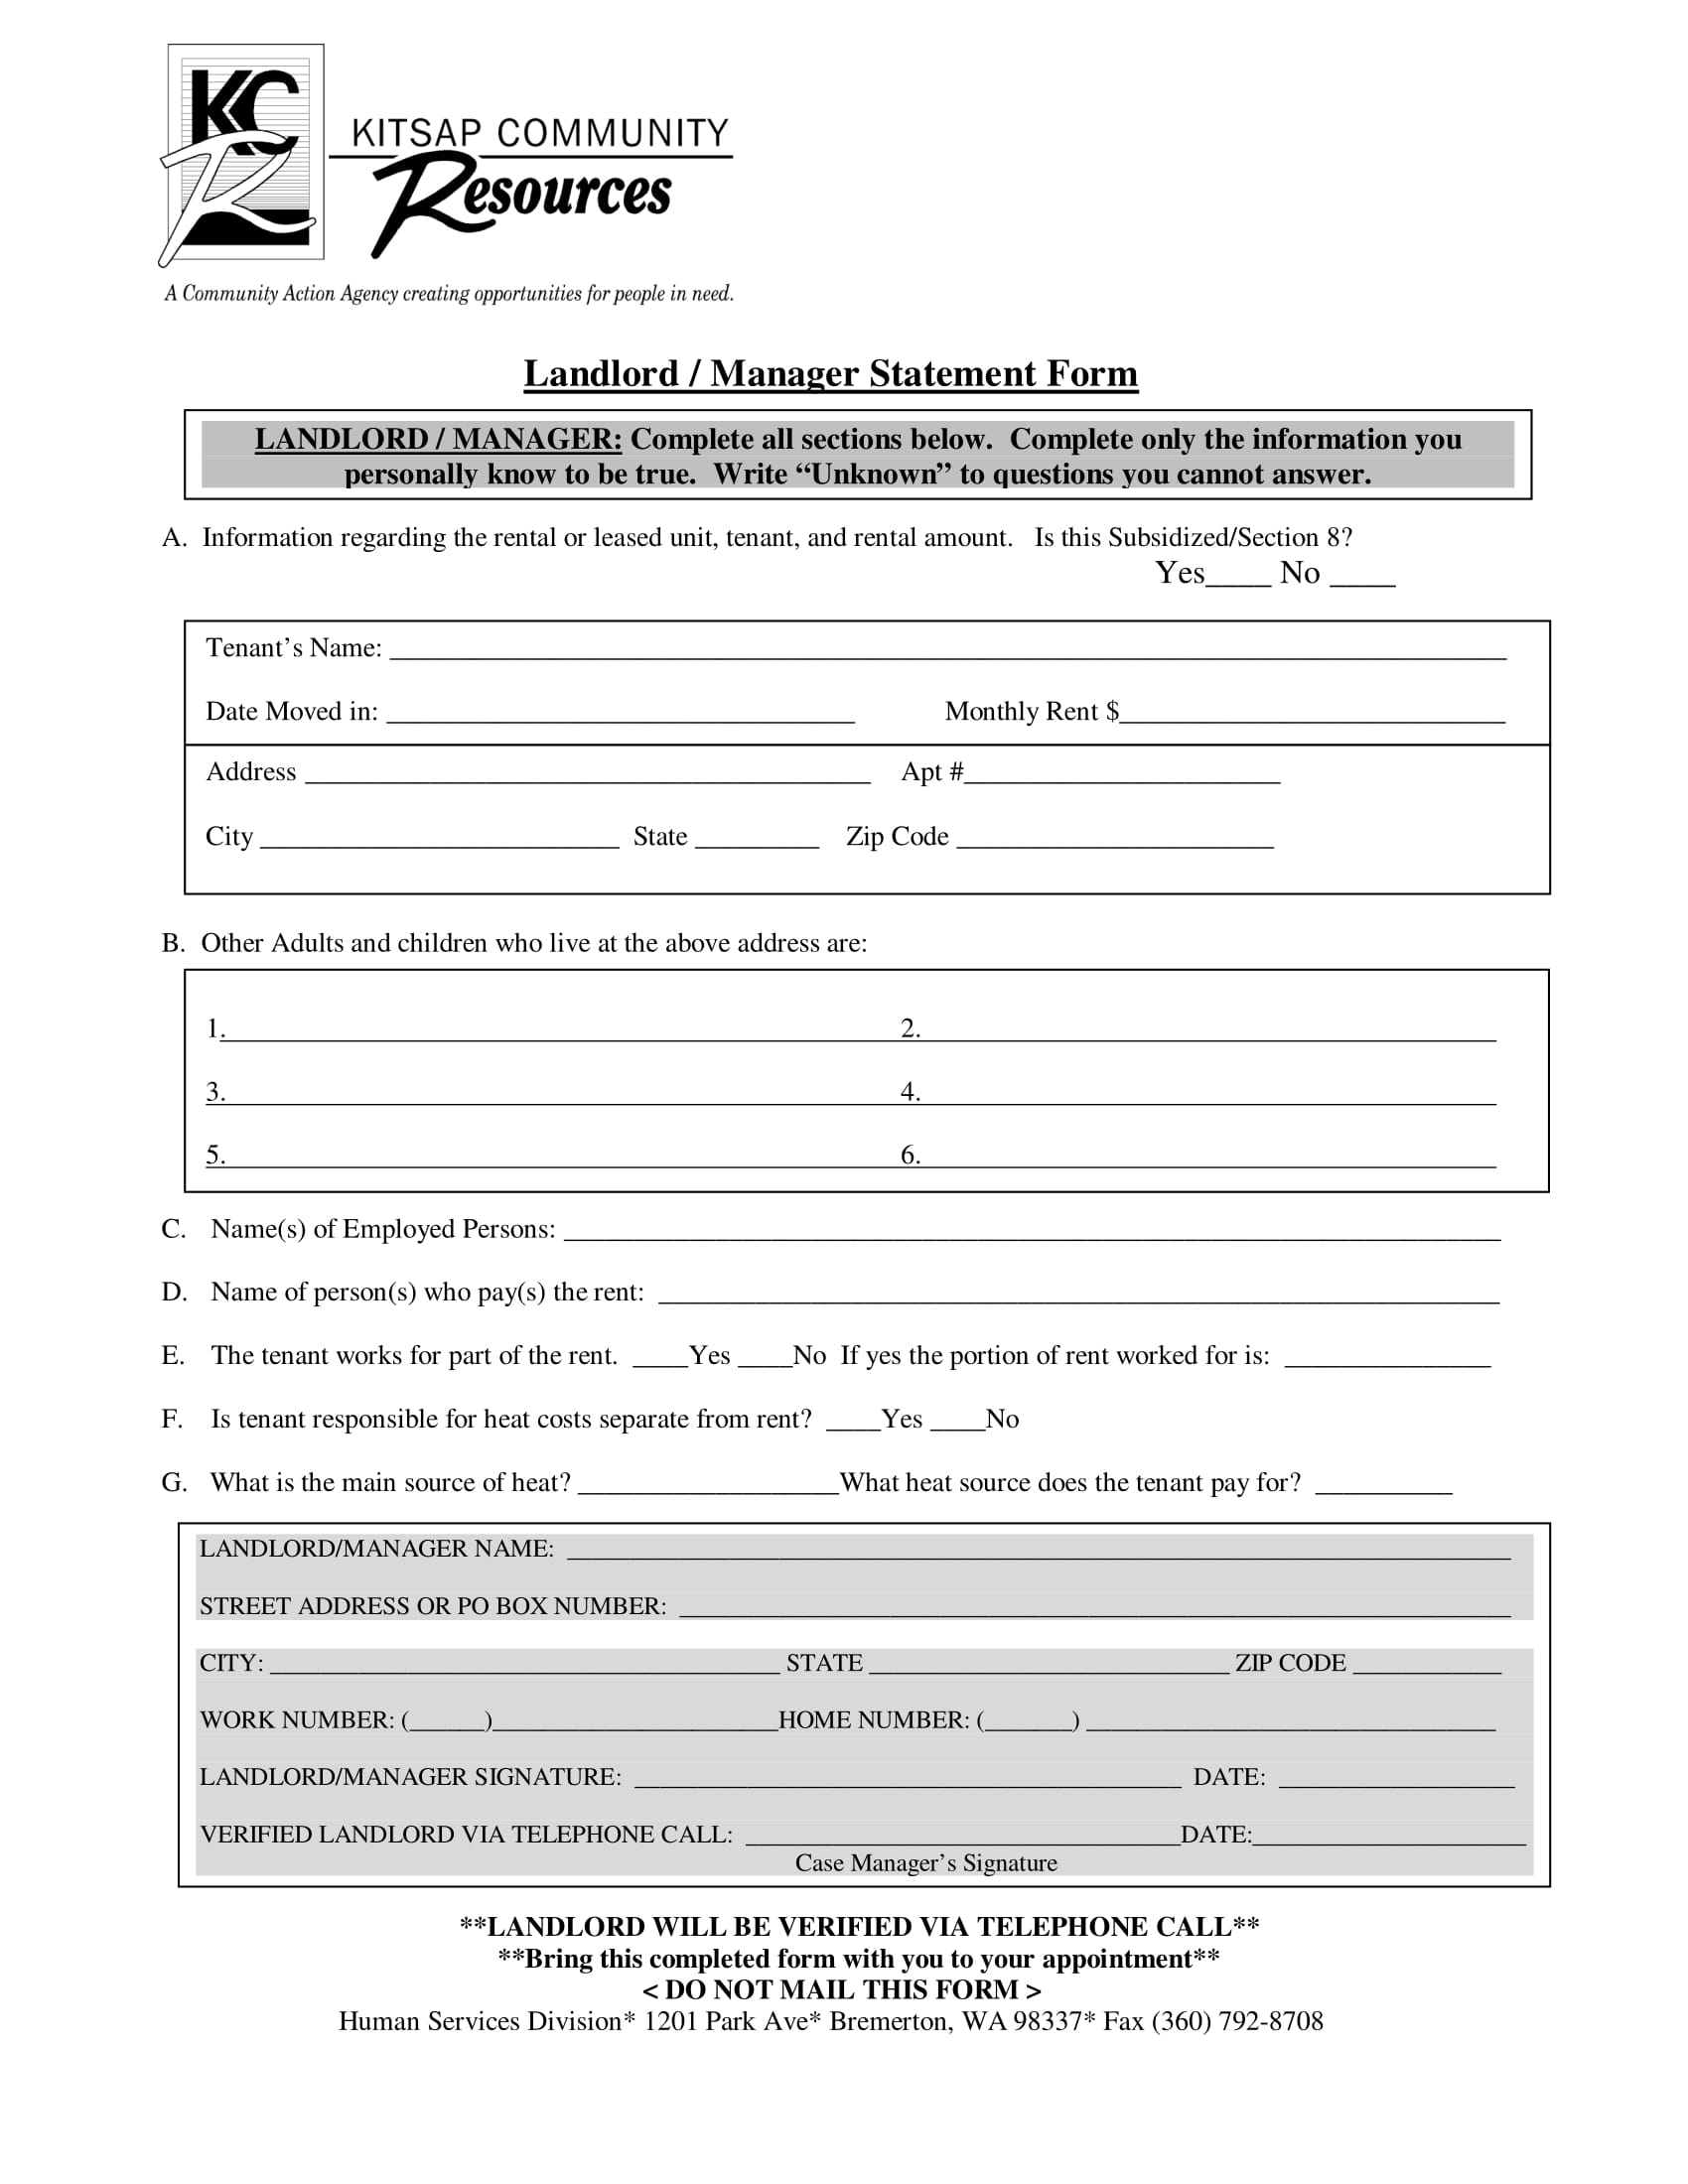 free-14-landlord-statement-forms-in-pdf-ms-word